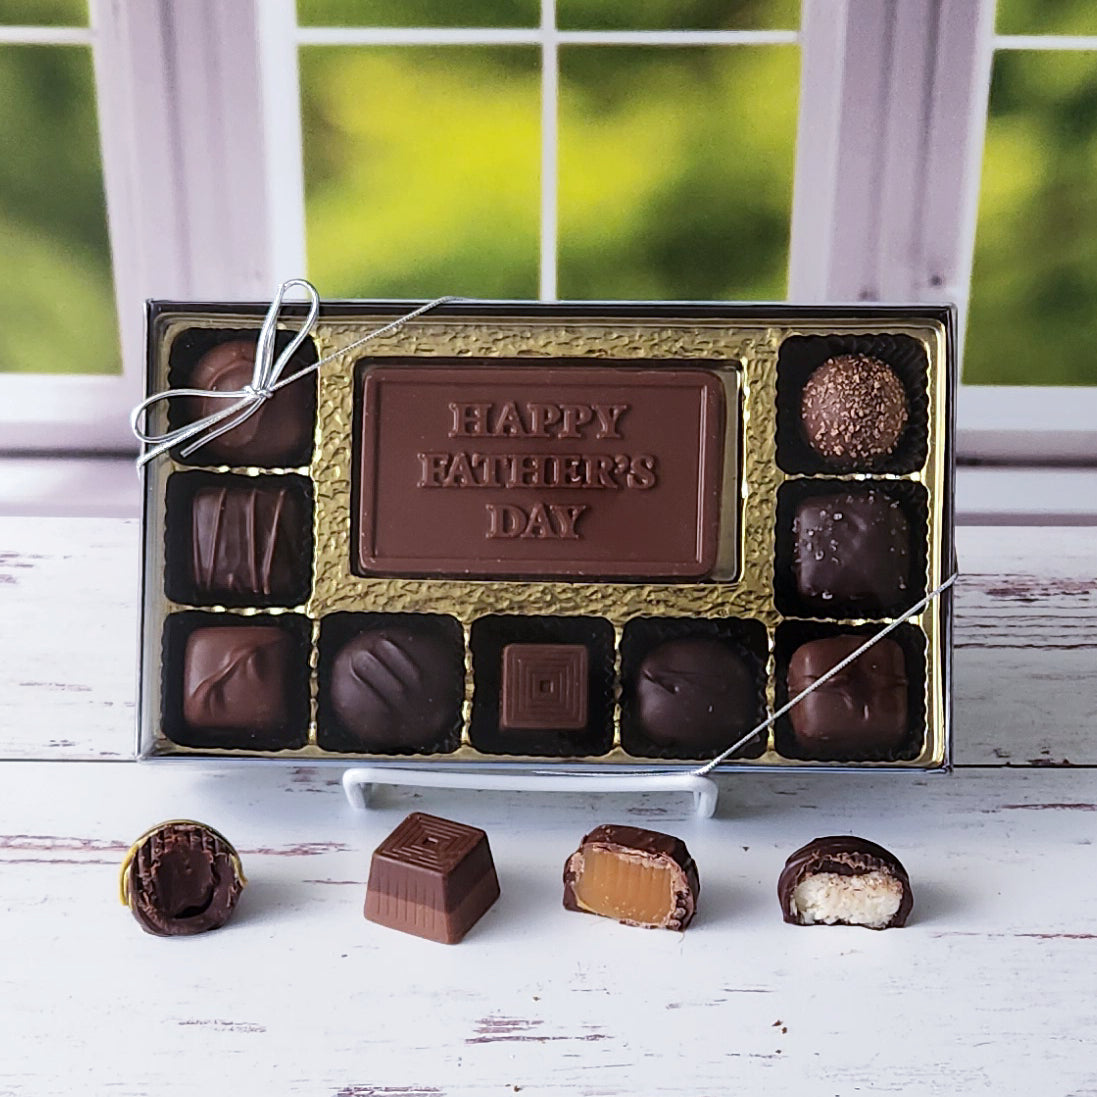 Get Dad a gift he will love with a box of chocolates.